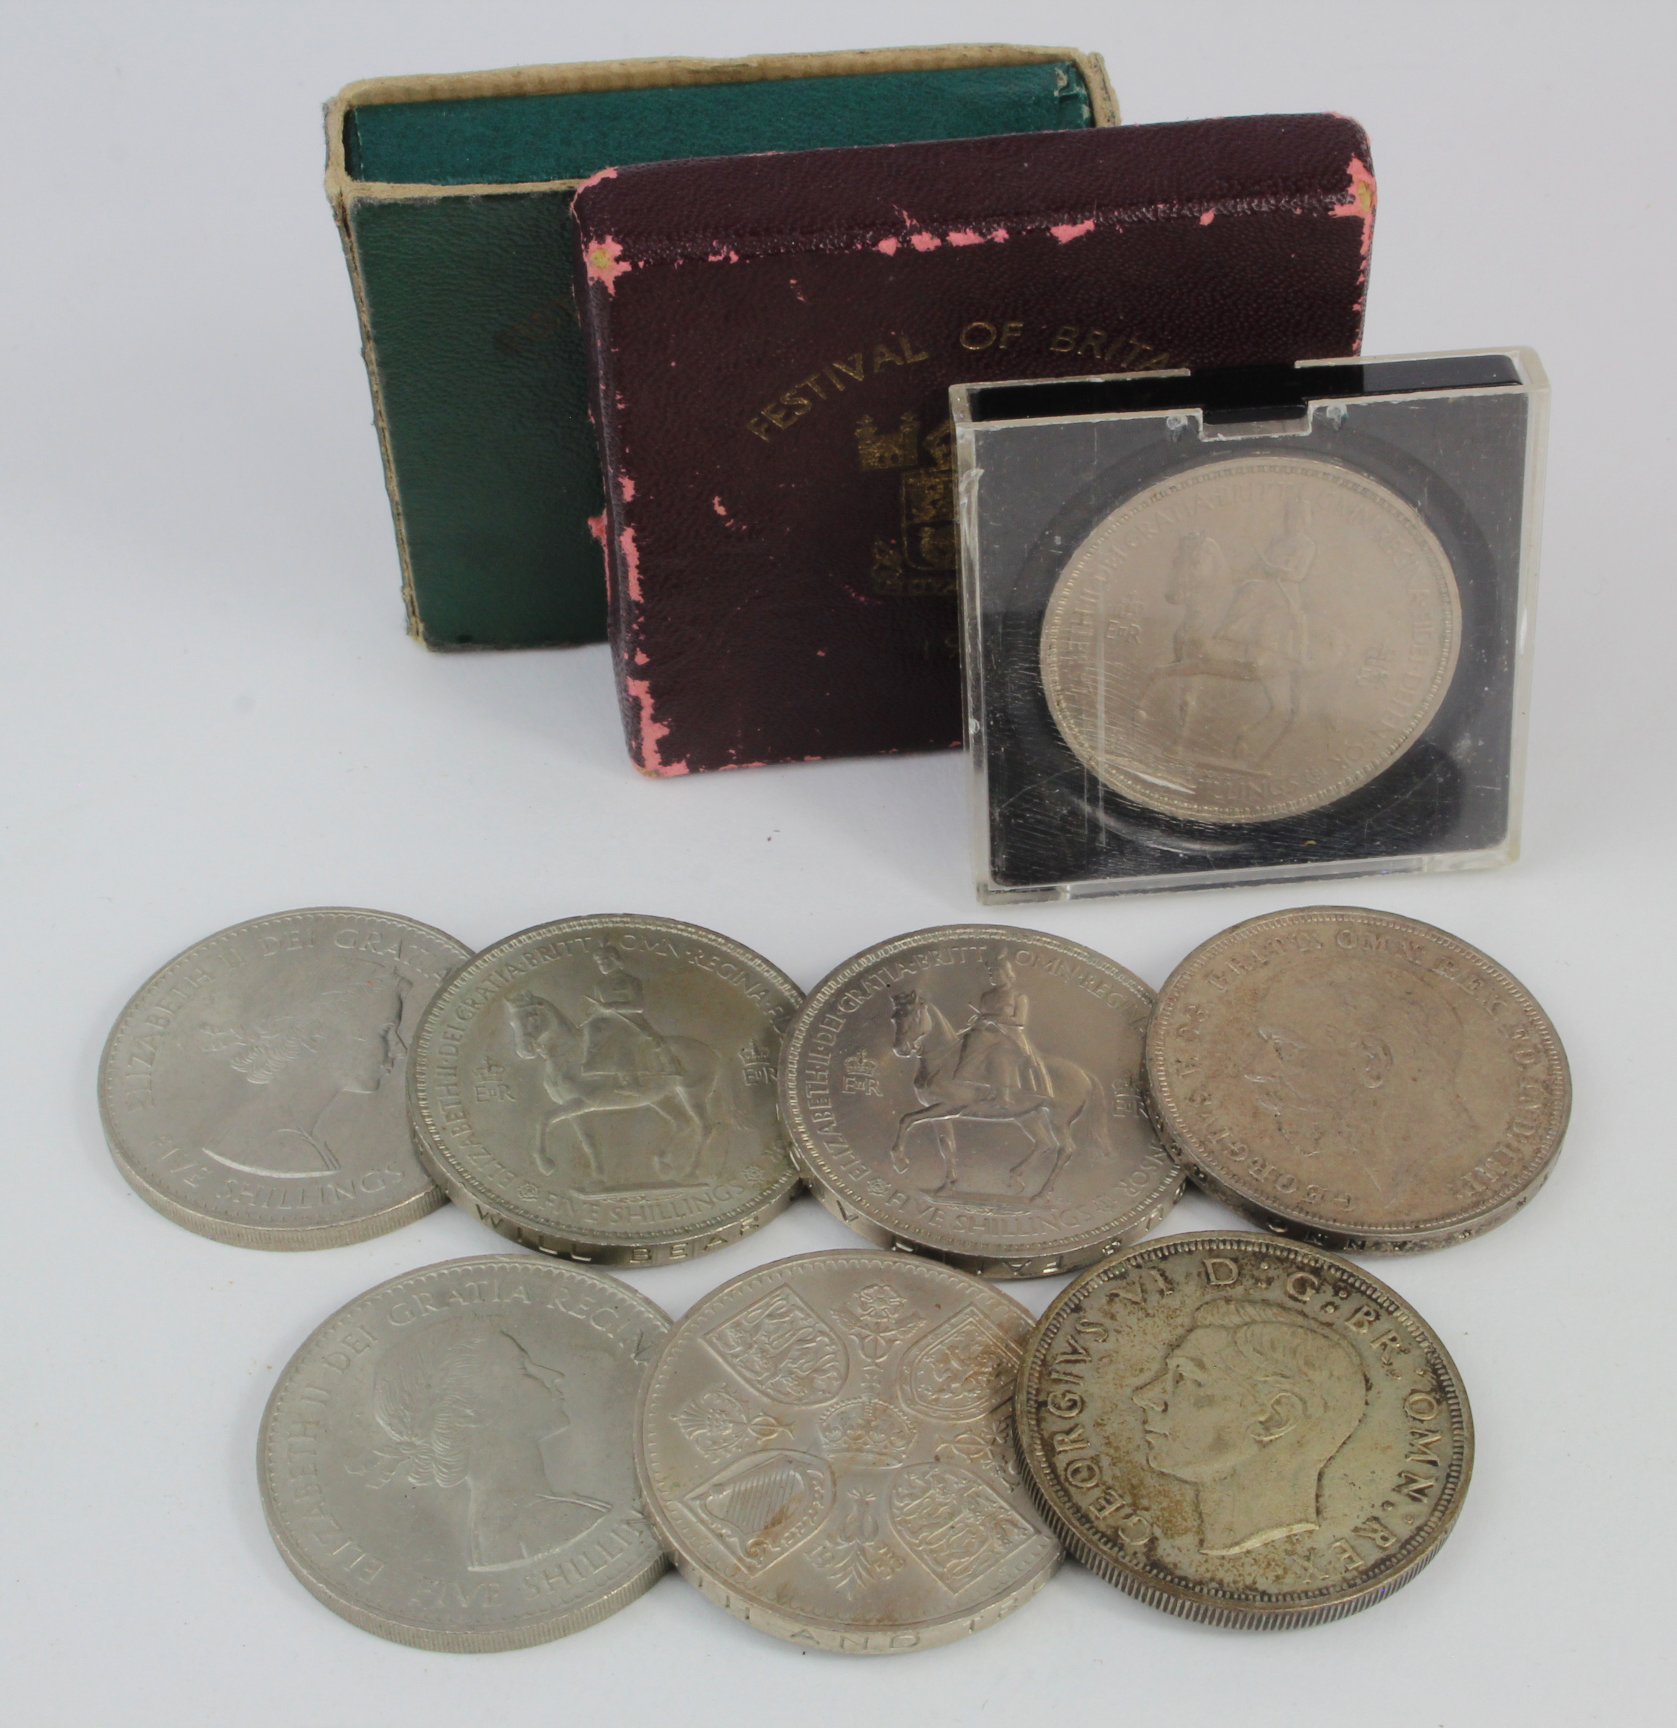 GB Crowns (10) various mid-20thC including silver 1935 and 1937.